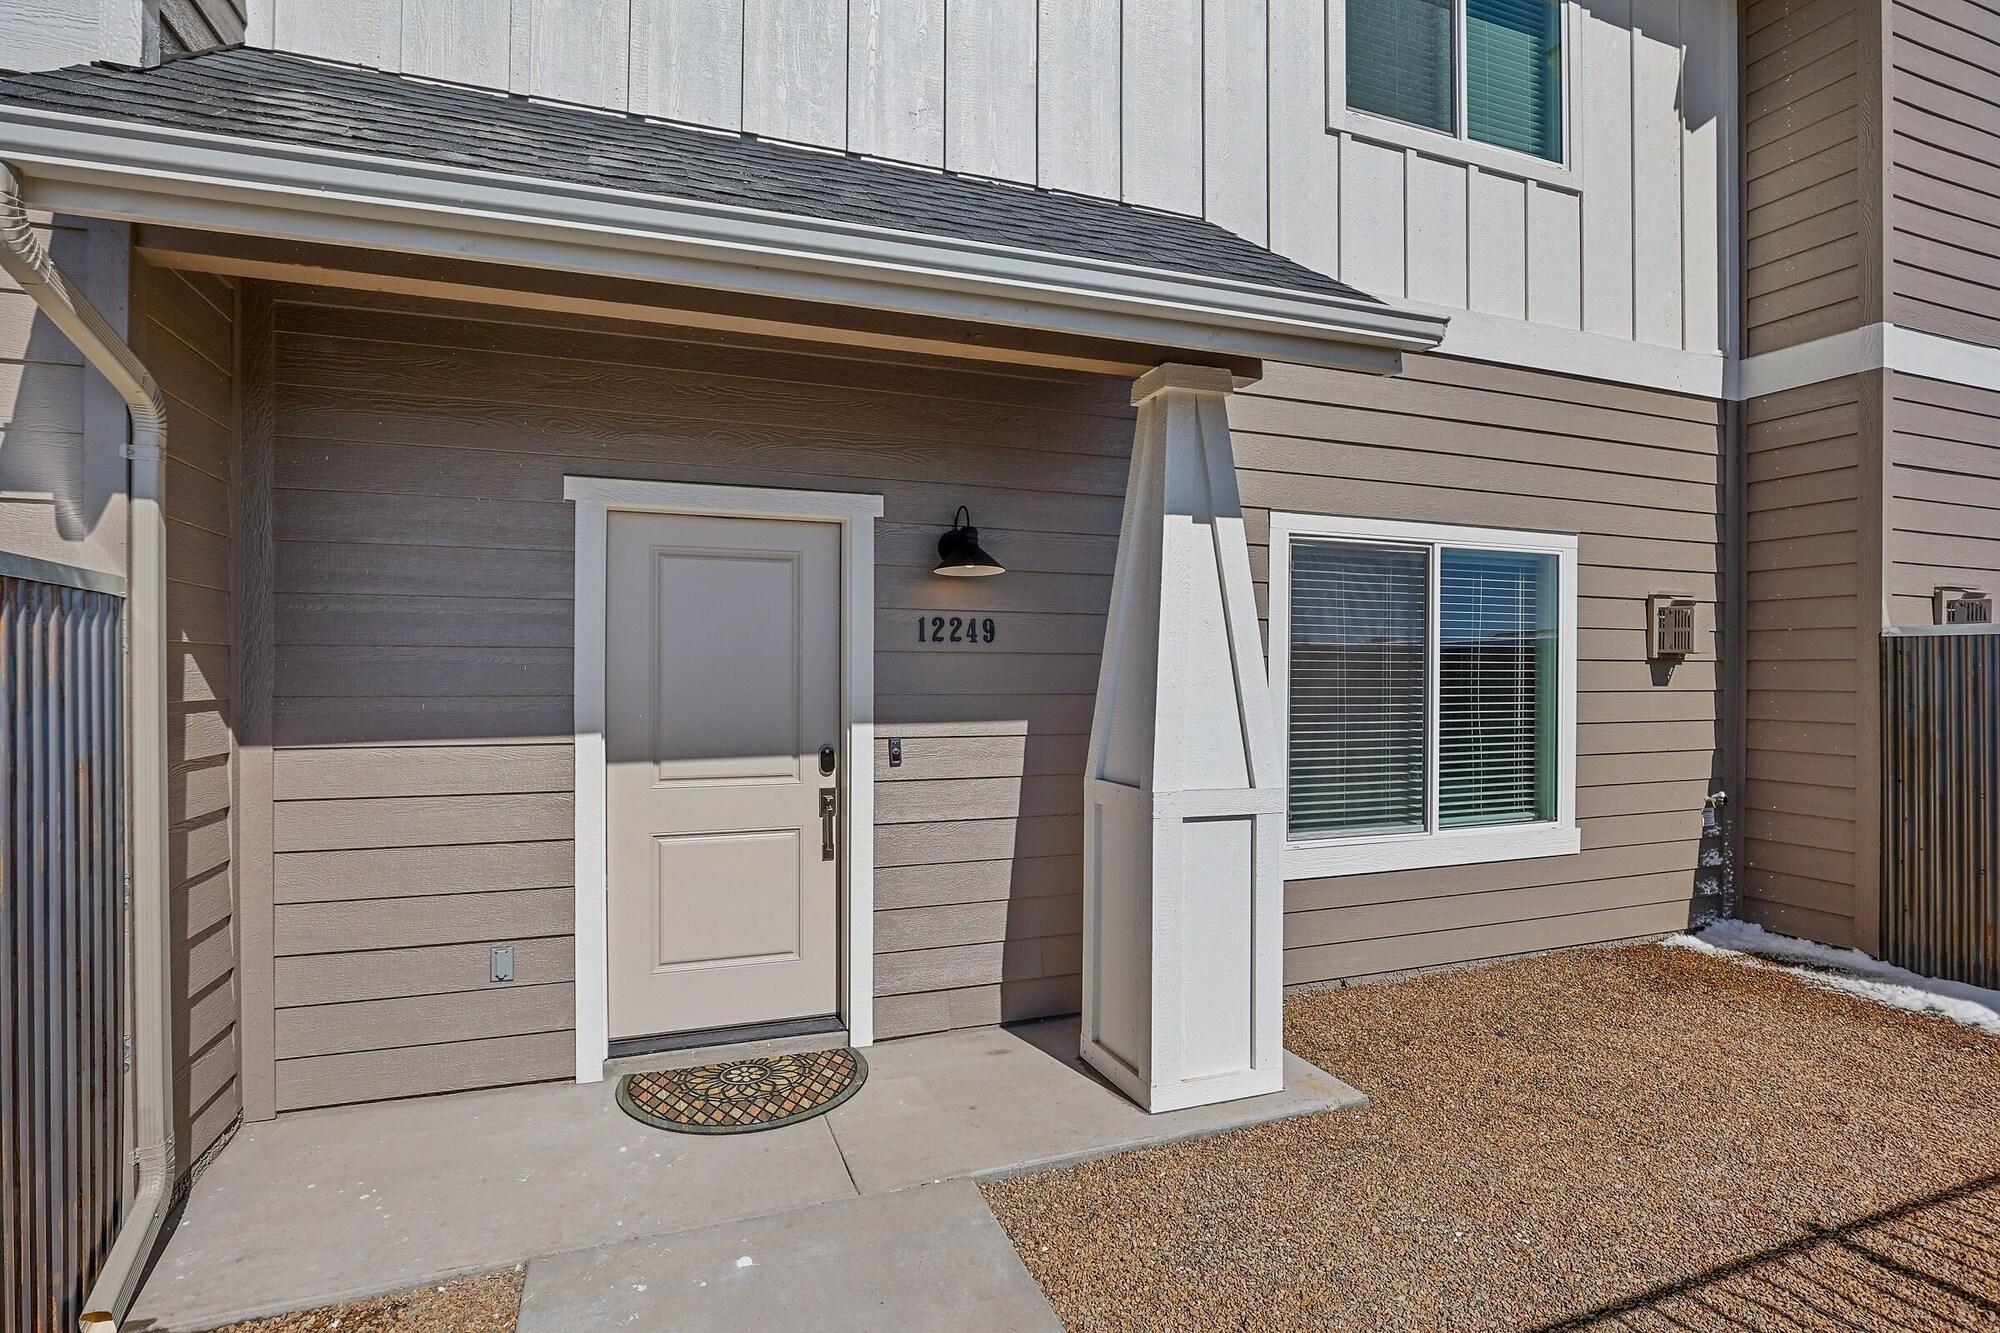 Vista Exterior Bliss Flagstaff 49 3 Bedroom Townhouse by Redawning